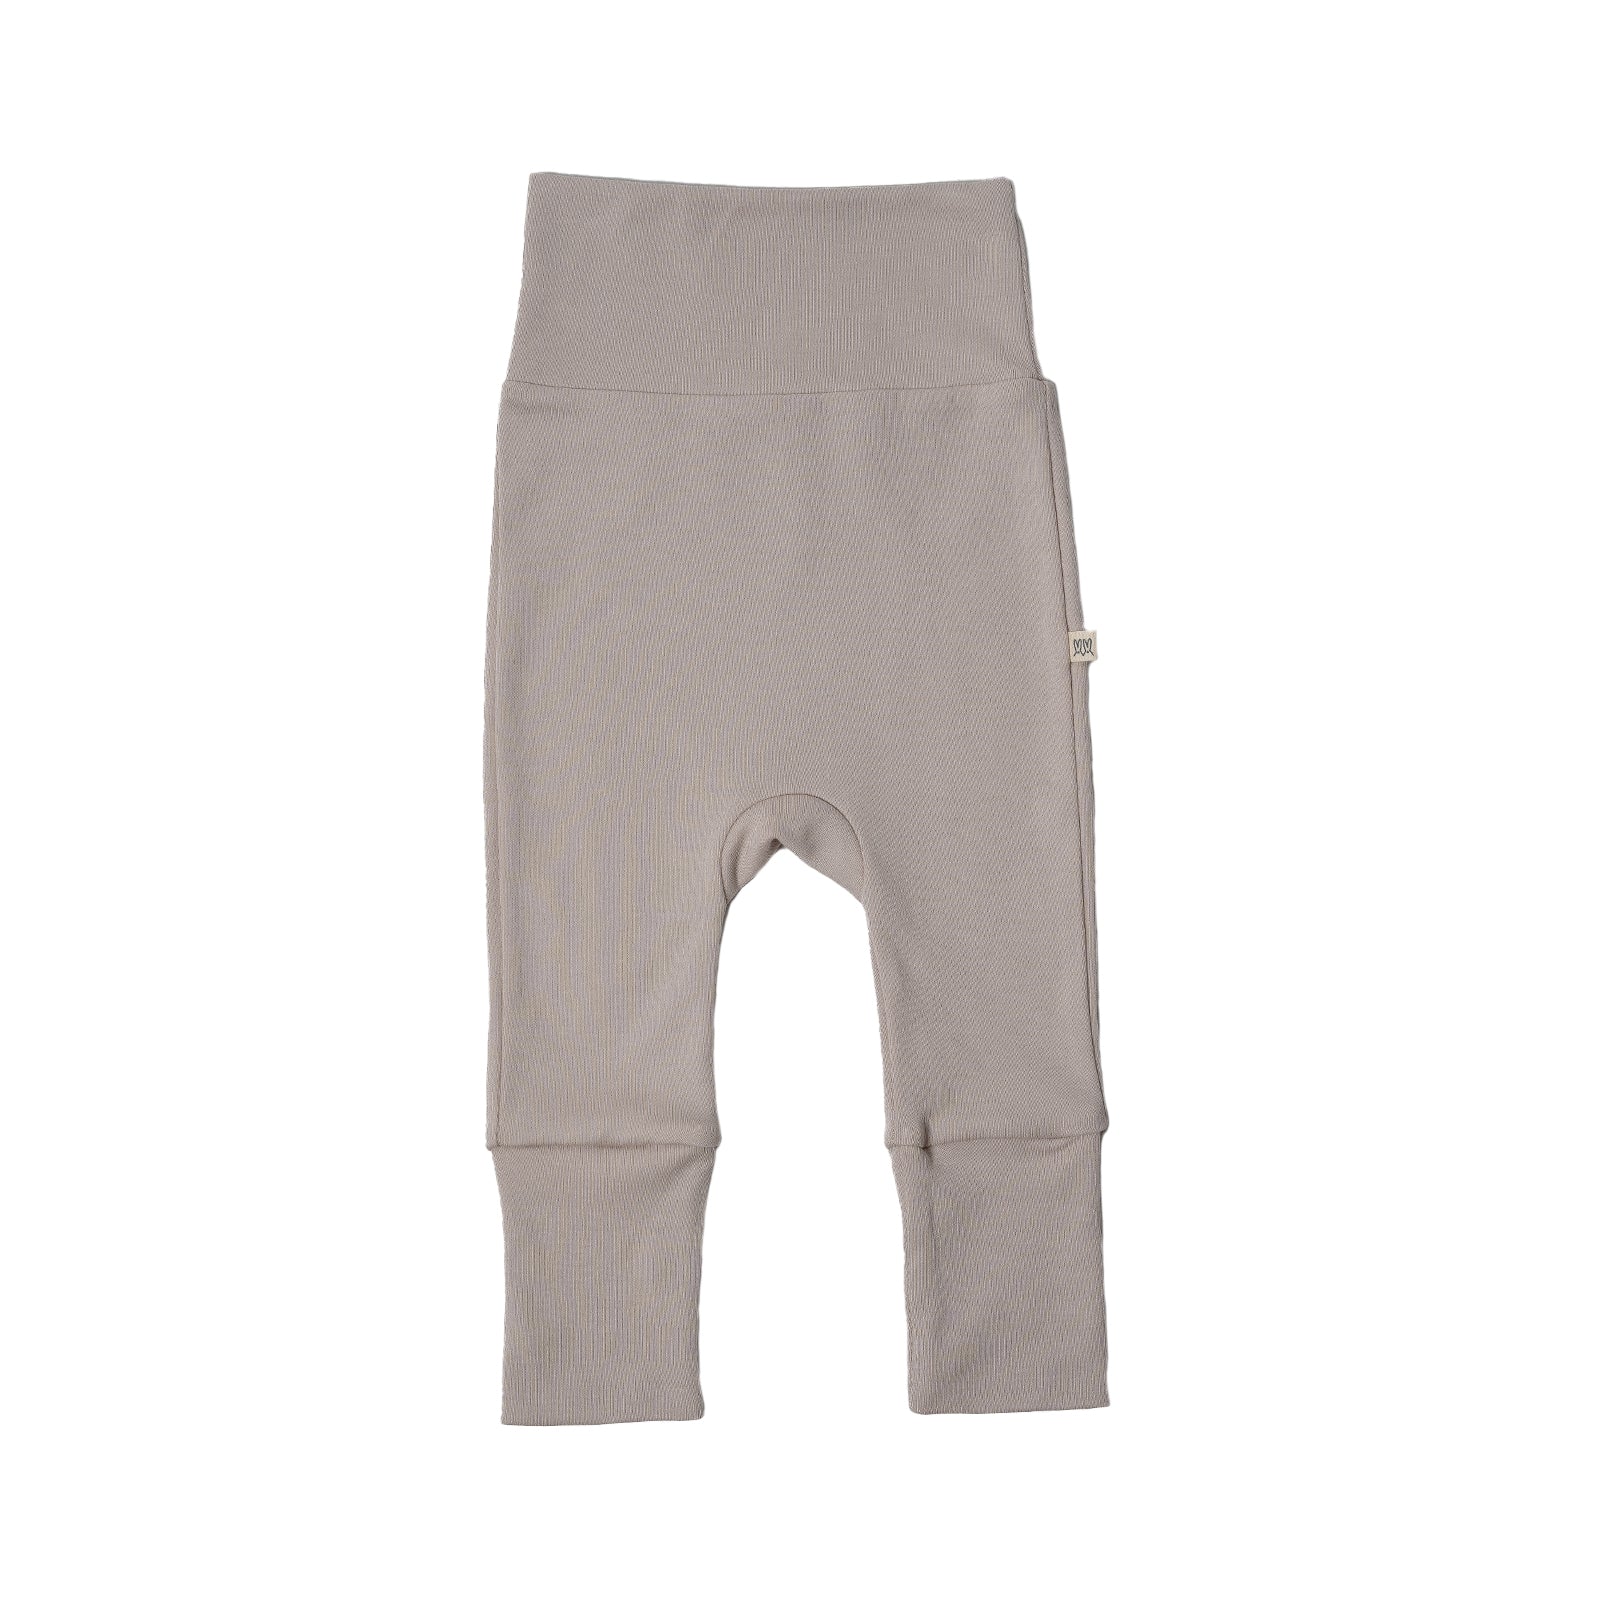 Pant Taupe -Adjustable Fit!